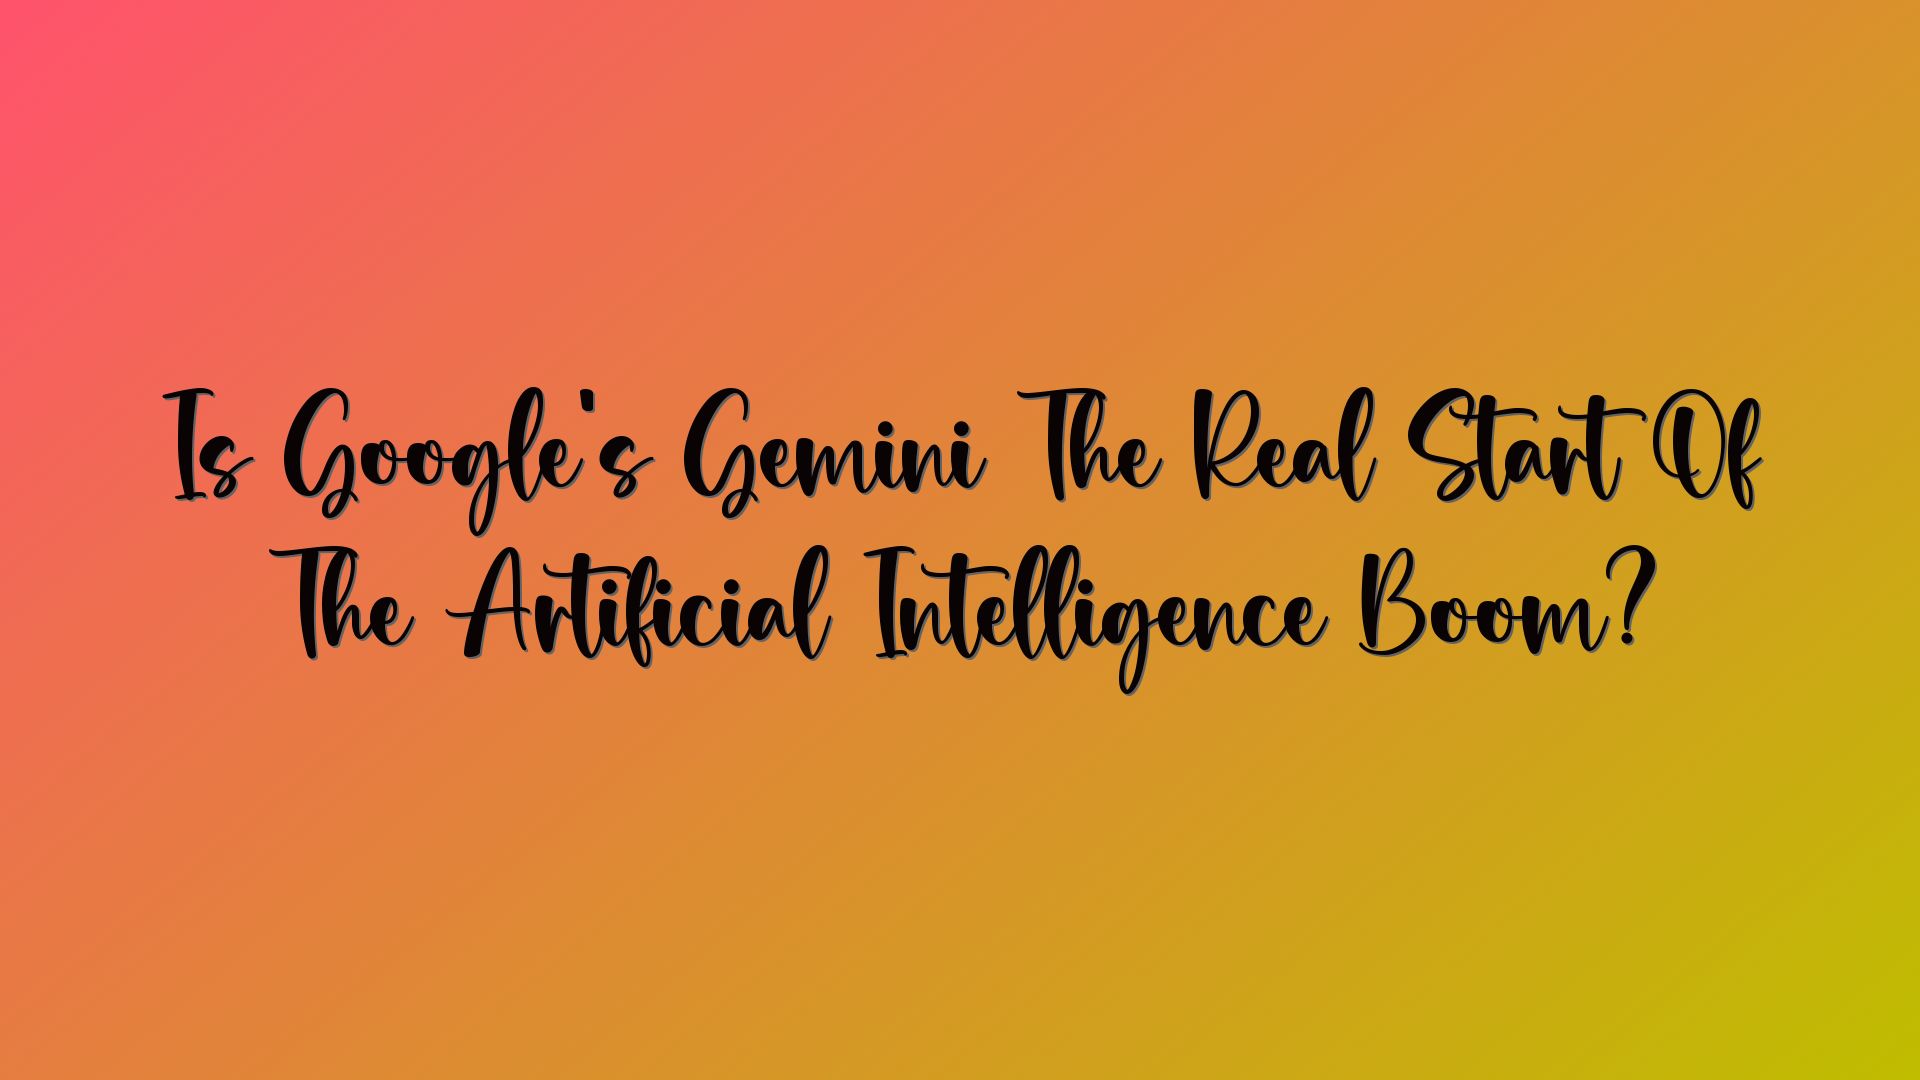 Is Google’s Gemini The Real Start Of The Artificial Intelligence Boom?